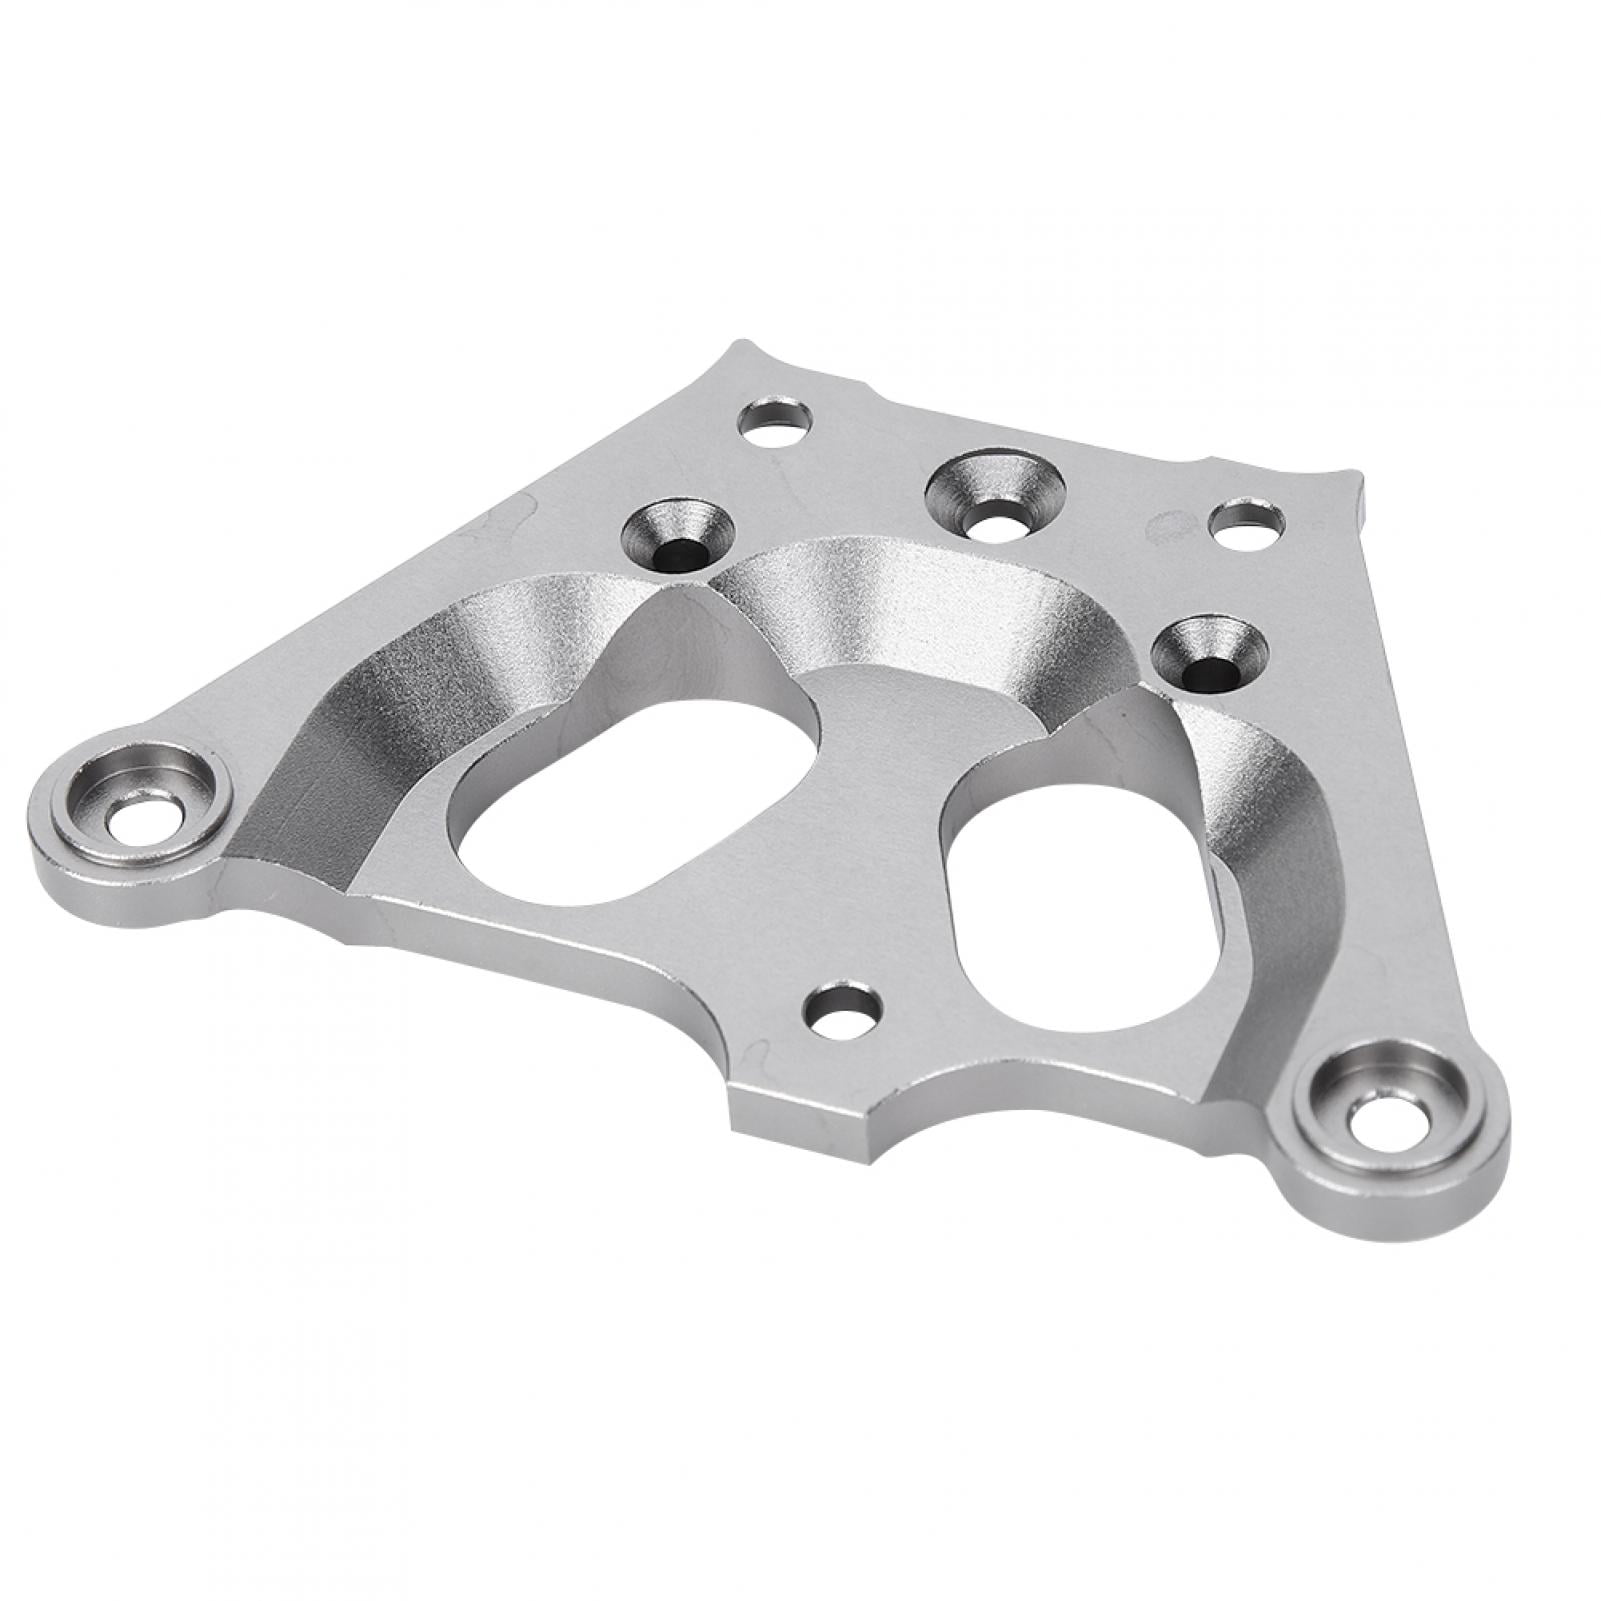 Details about   Front Support Cover Front Chassis Brace for Losi Racing LOSI 5T TLR 5B RC Car❤GP